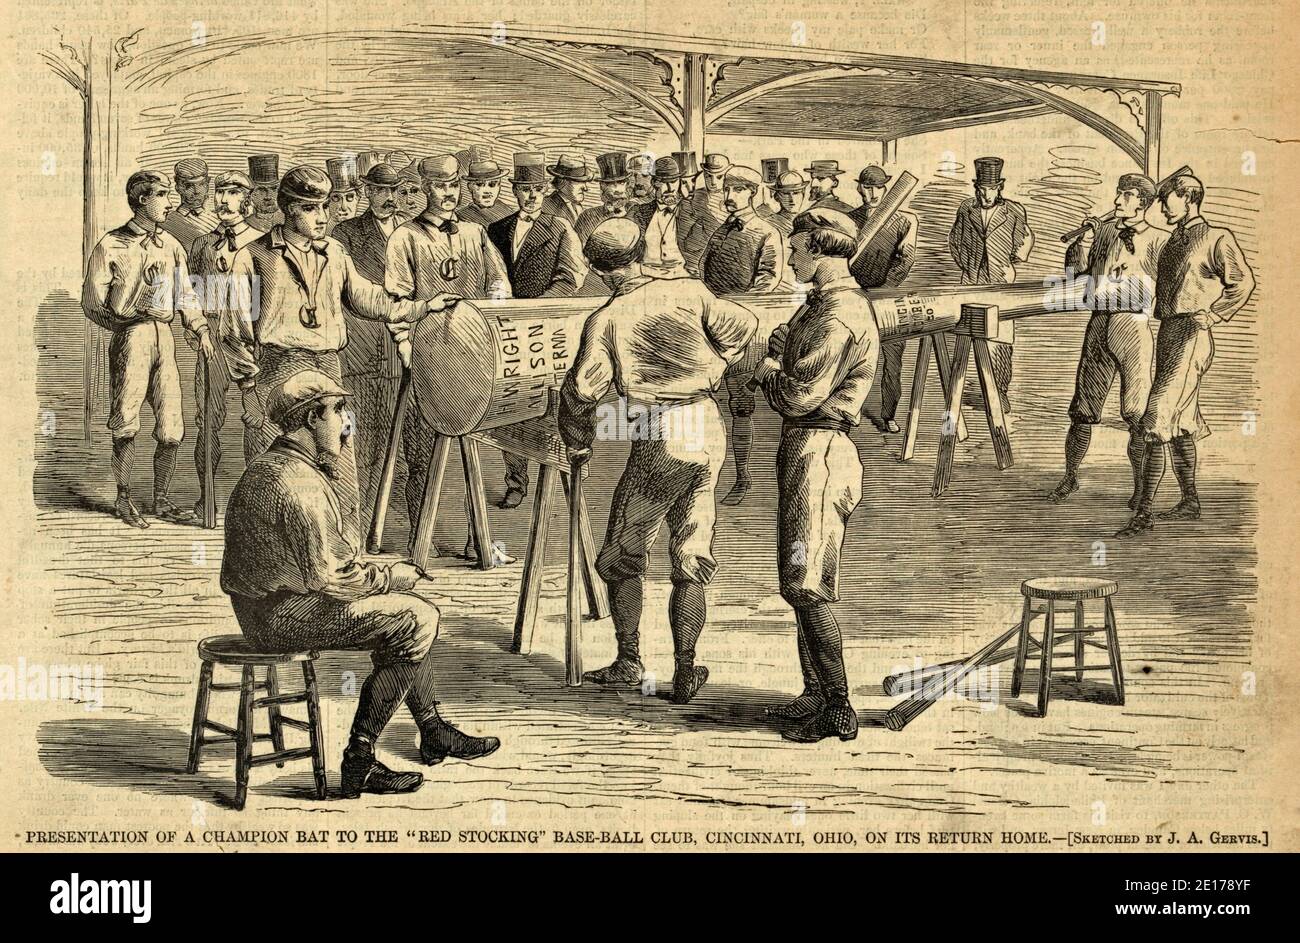 Presentation of a champion bat to the 'Red Stocking' base-ball club, Cincinnati, Ohio, on its return home -  Illustration showing members of the Red Stocking baseball team and distinguished guests standing around 'champion' baseball bat, 27 feet in length, presented to the team after amassing a 21-0 record. July 24, 1869 Stock Photo